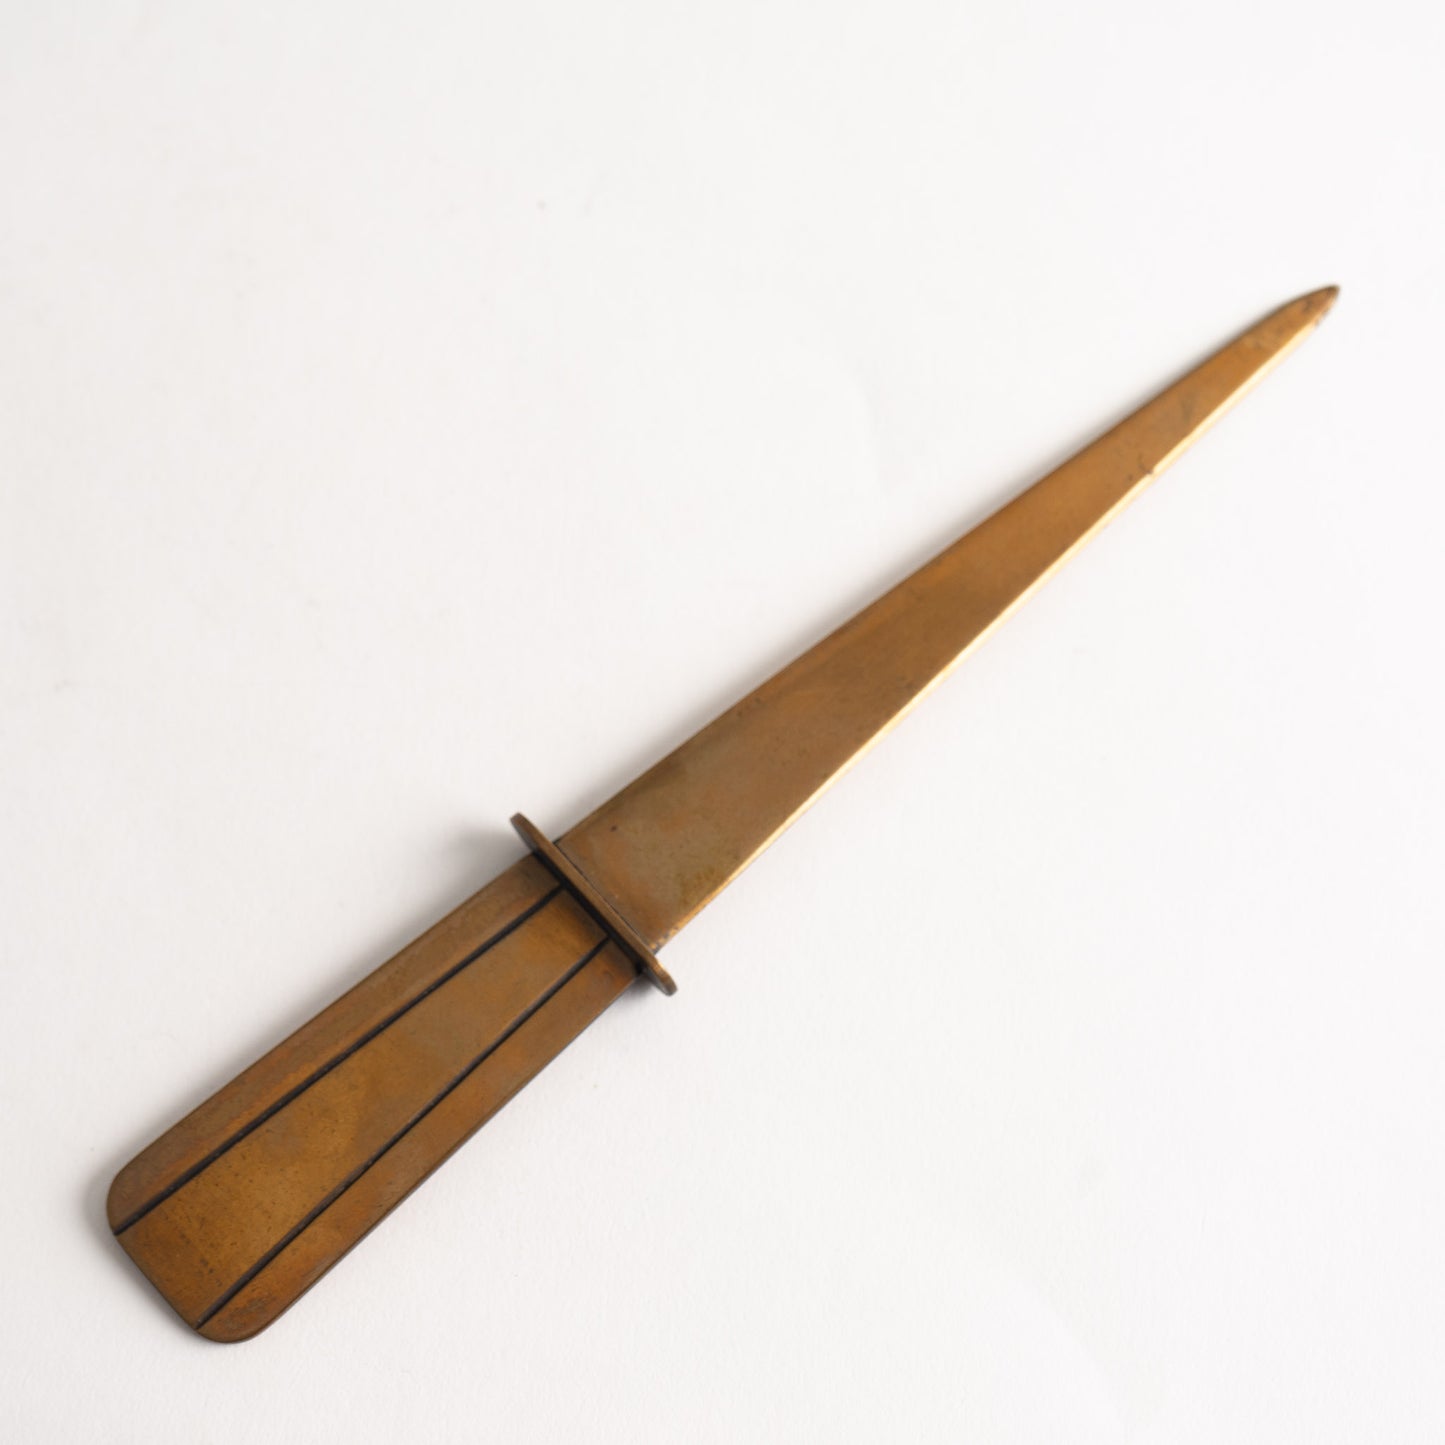 Vintage Brass Letter Opener with Striped Handle - Wick Dipper 